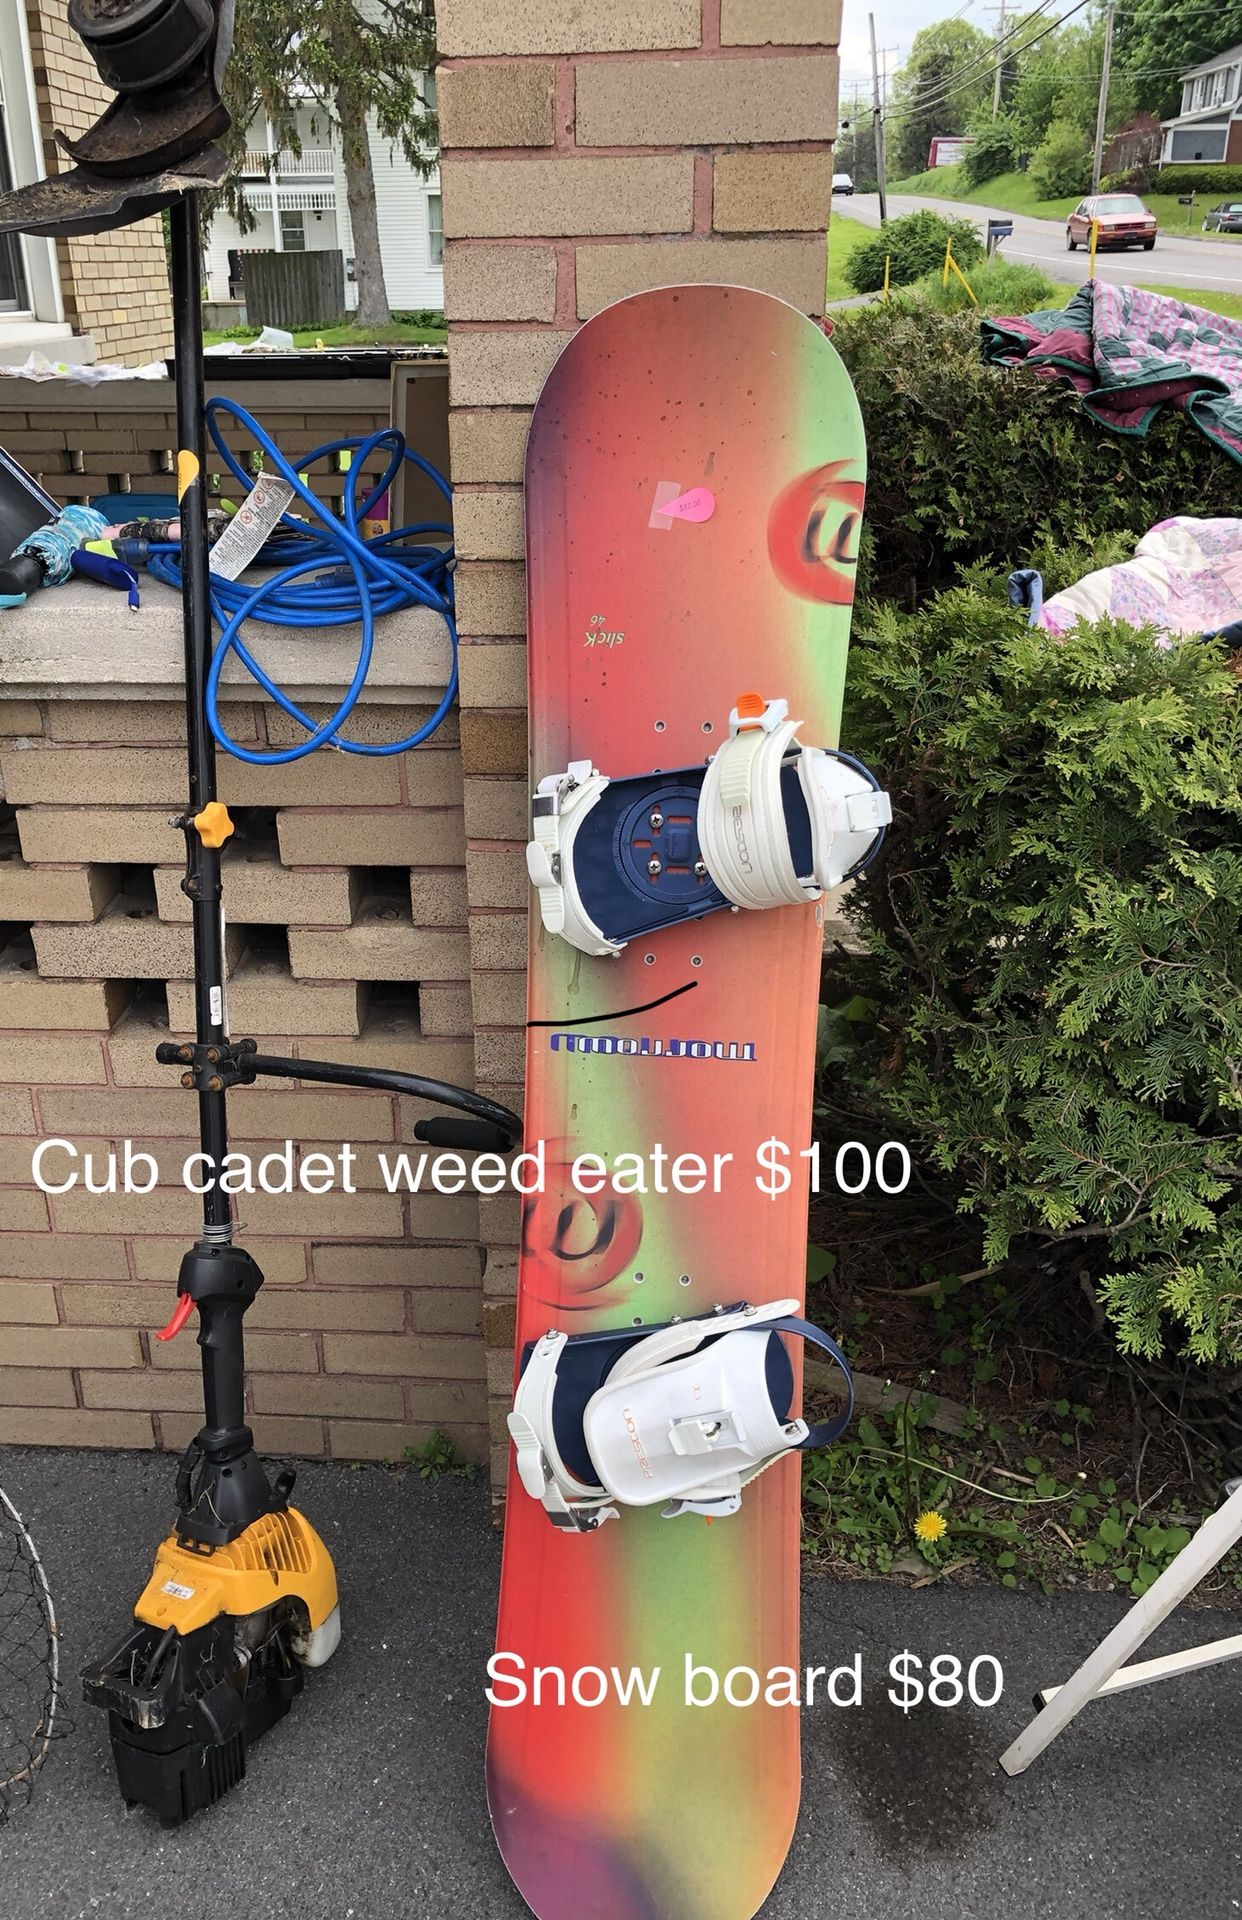 Cub cadet weed eater